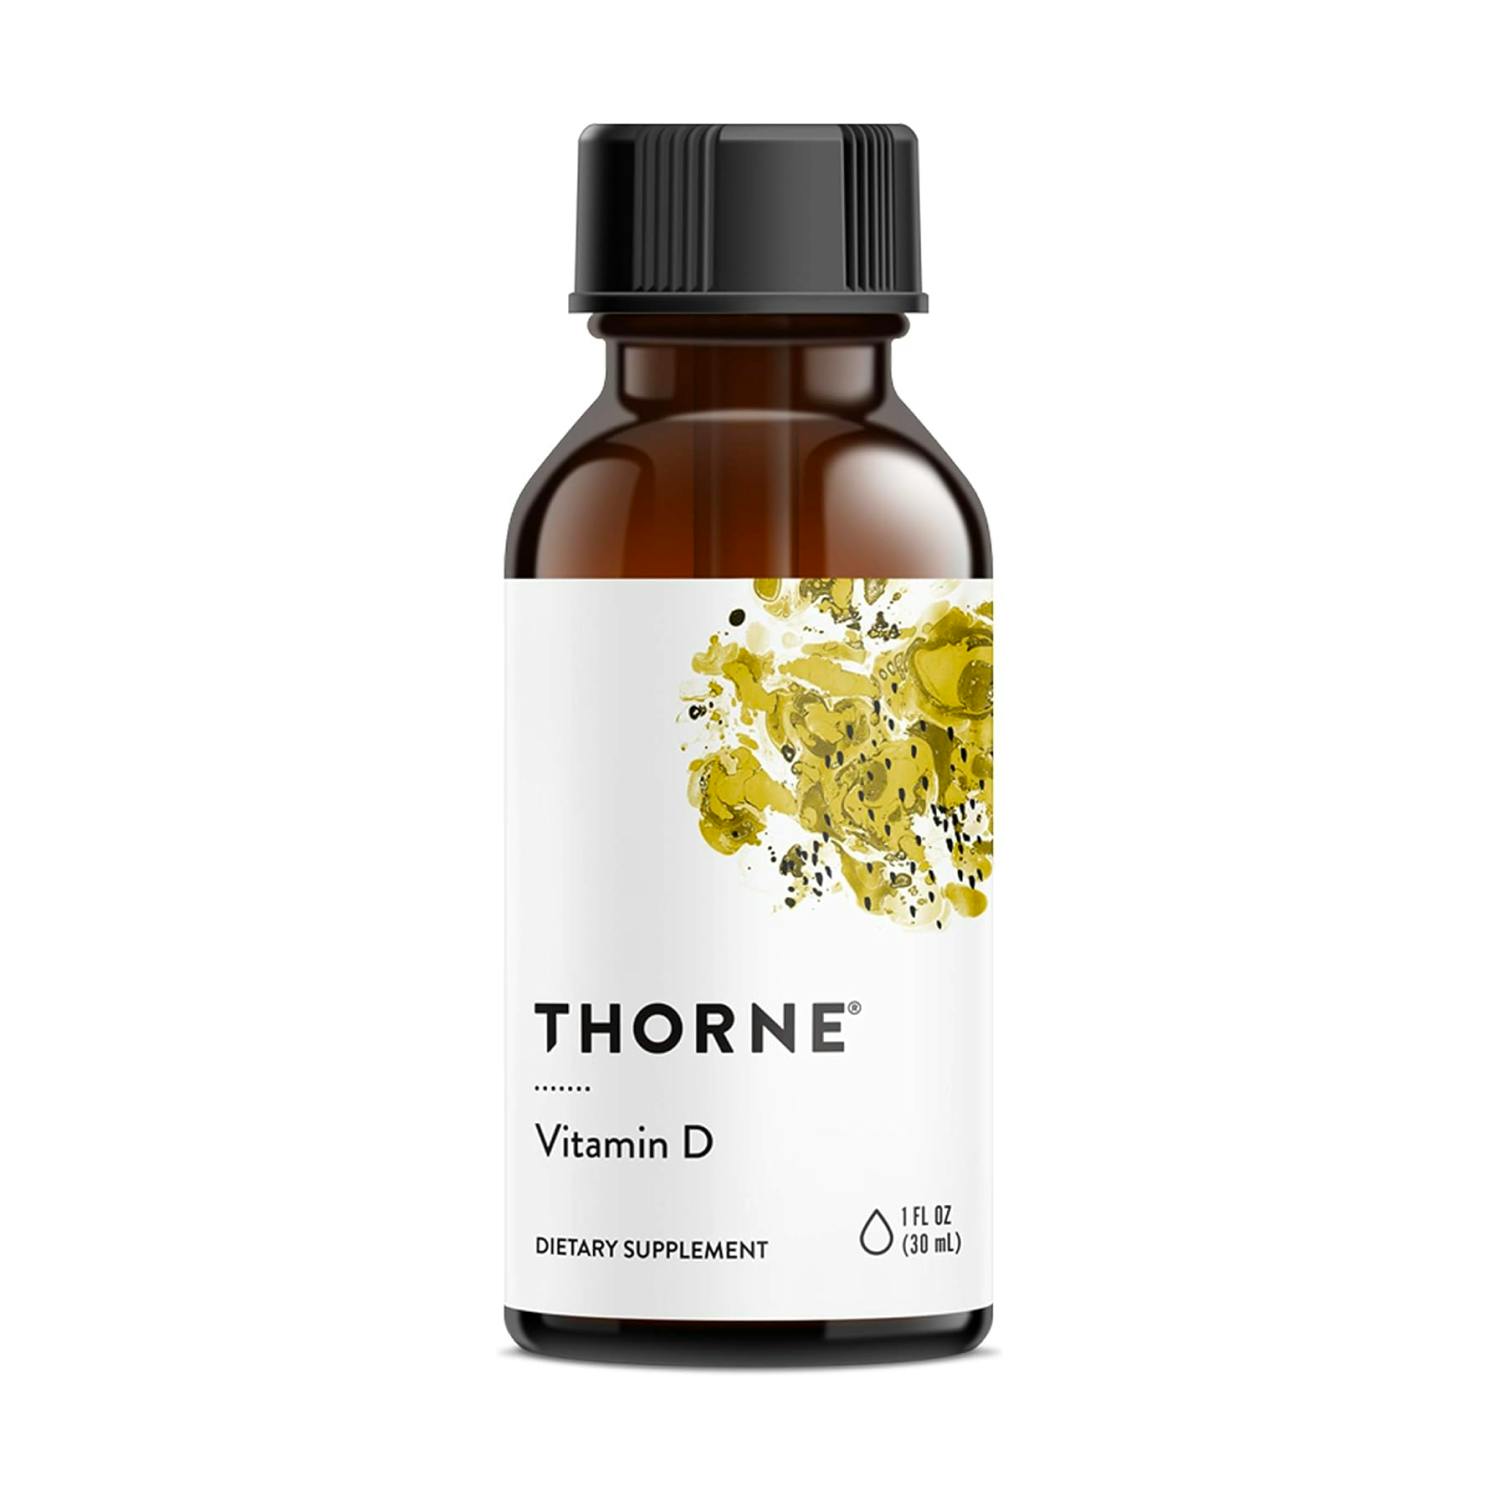 THORNE Vitamin D Liquid - Vitamin D Supplement - Supports Healthy Bones and Muscles, Cardiovascular Health, and Immune Function* - 1 Fl Oz (30 ml)- 600 Servings